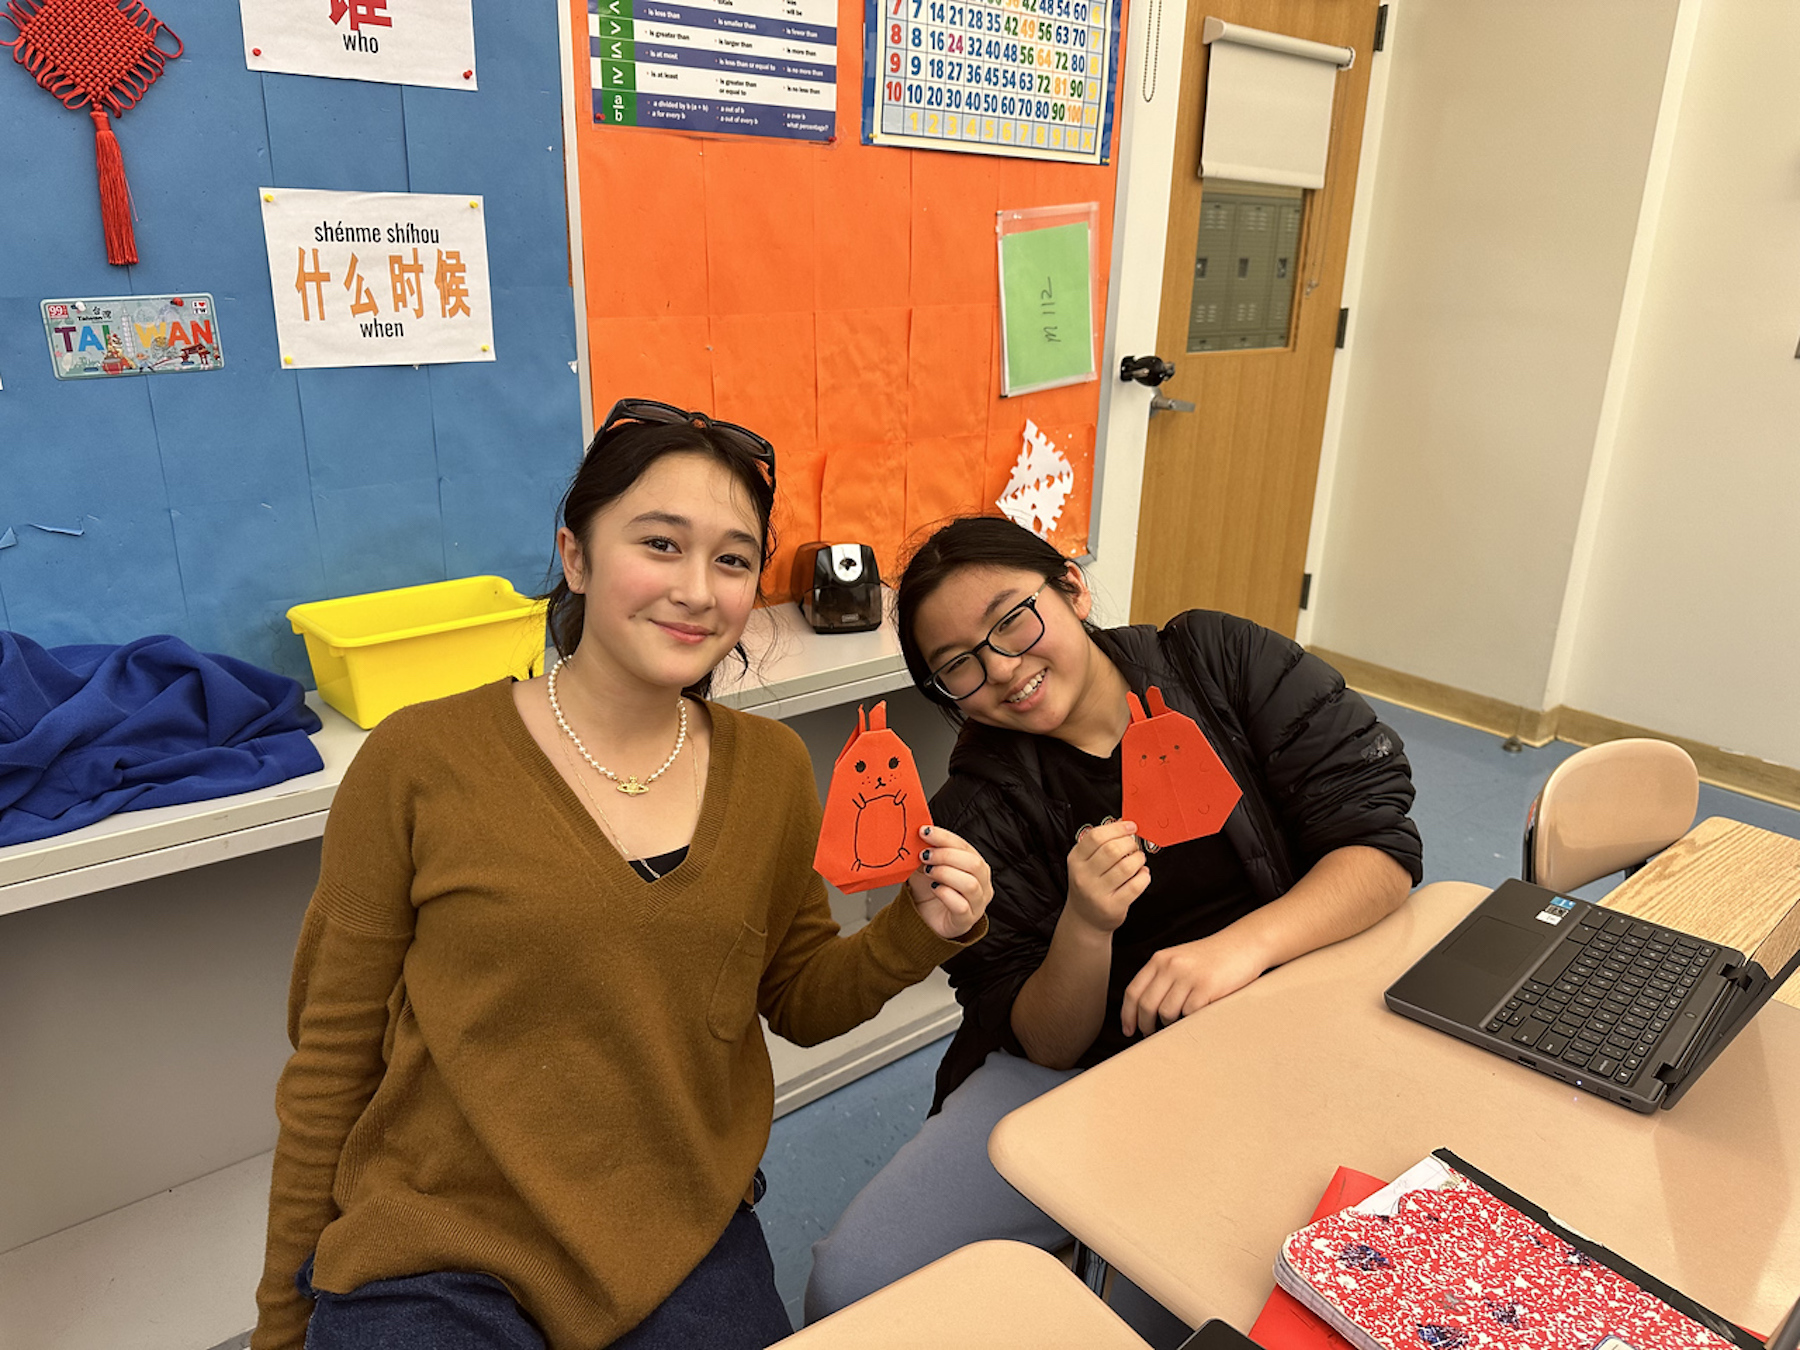 Two Fieldston Middle students smile and hold up their rabbit origami creations.